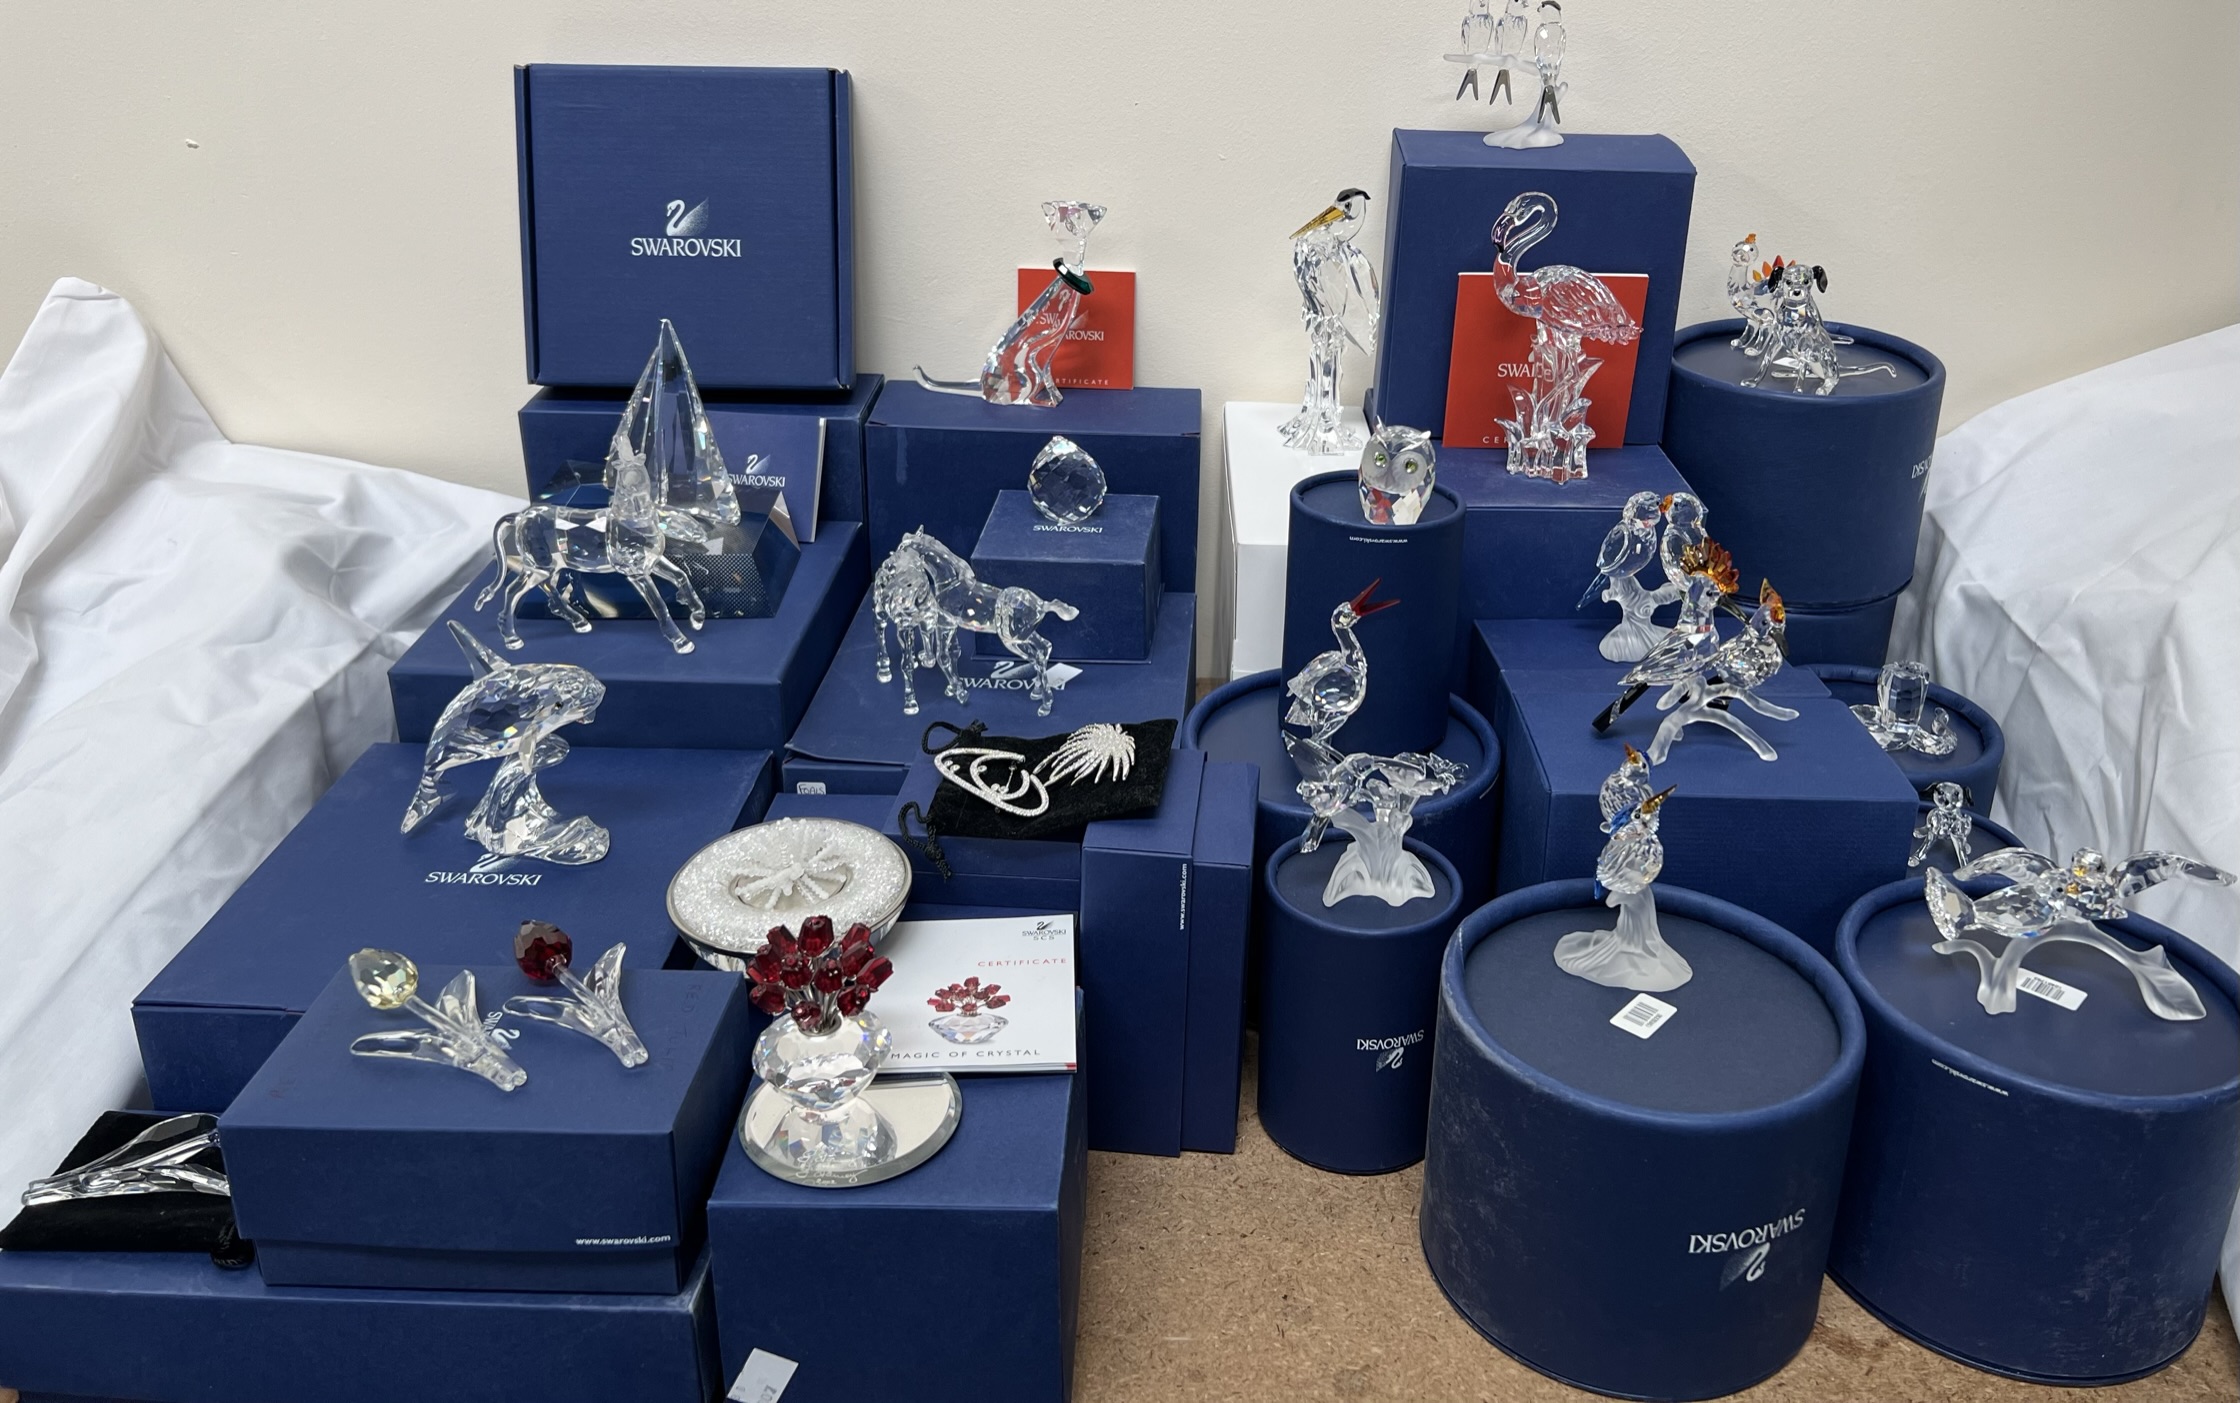 A large collection of Swarovski figures including a sailing ship, horses, whale, flowers, stork,